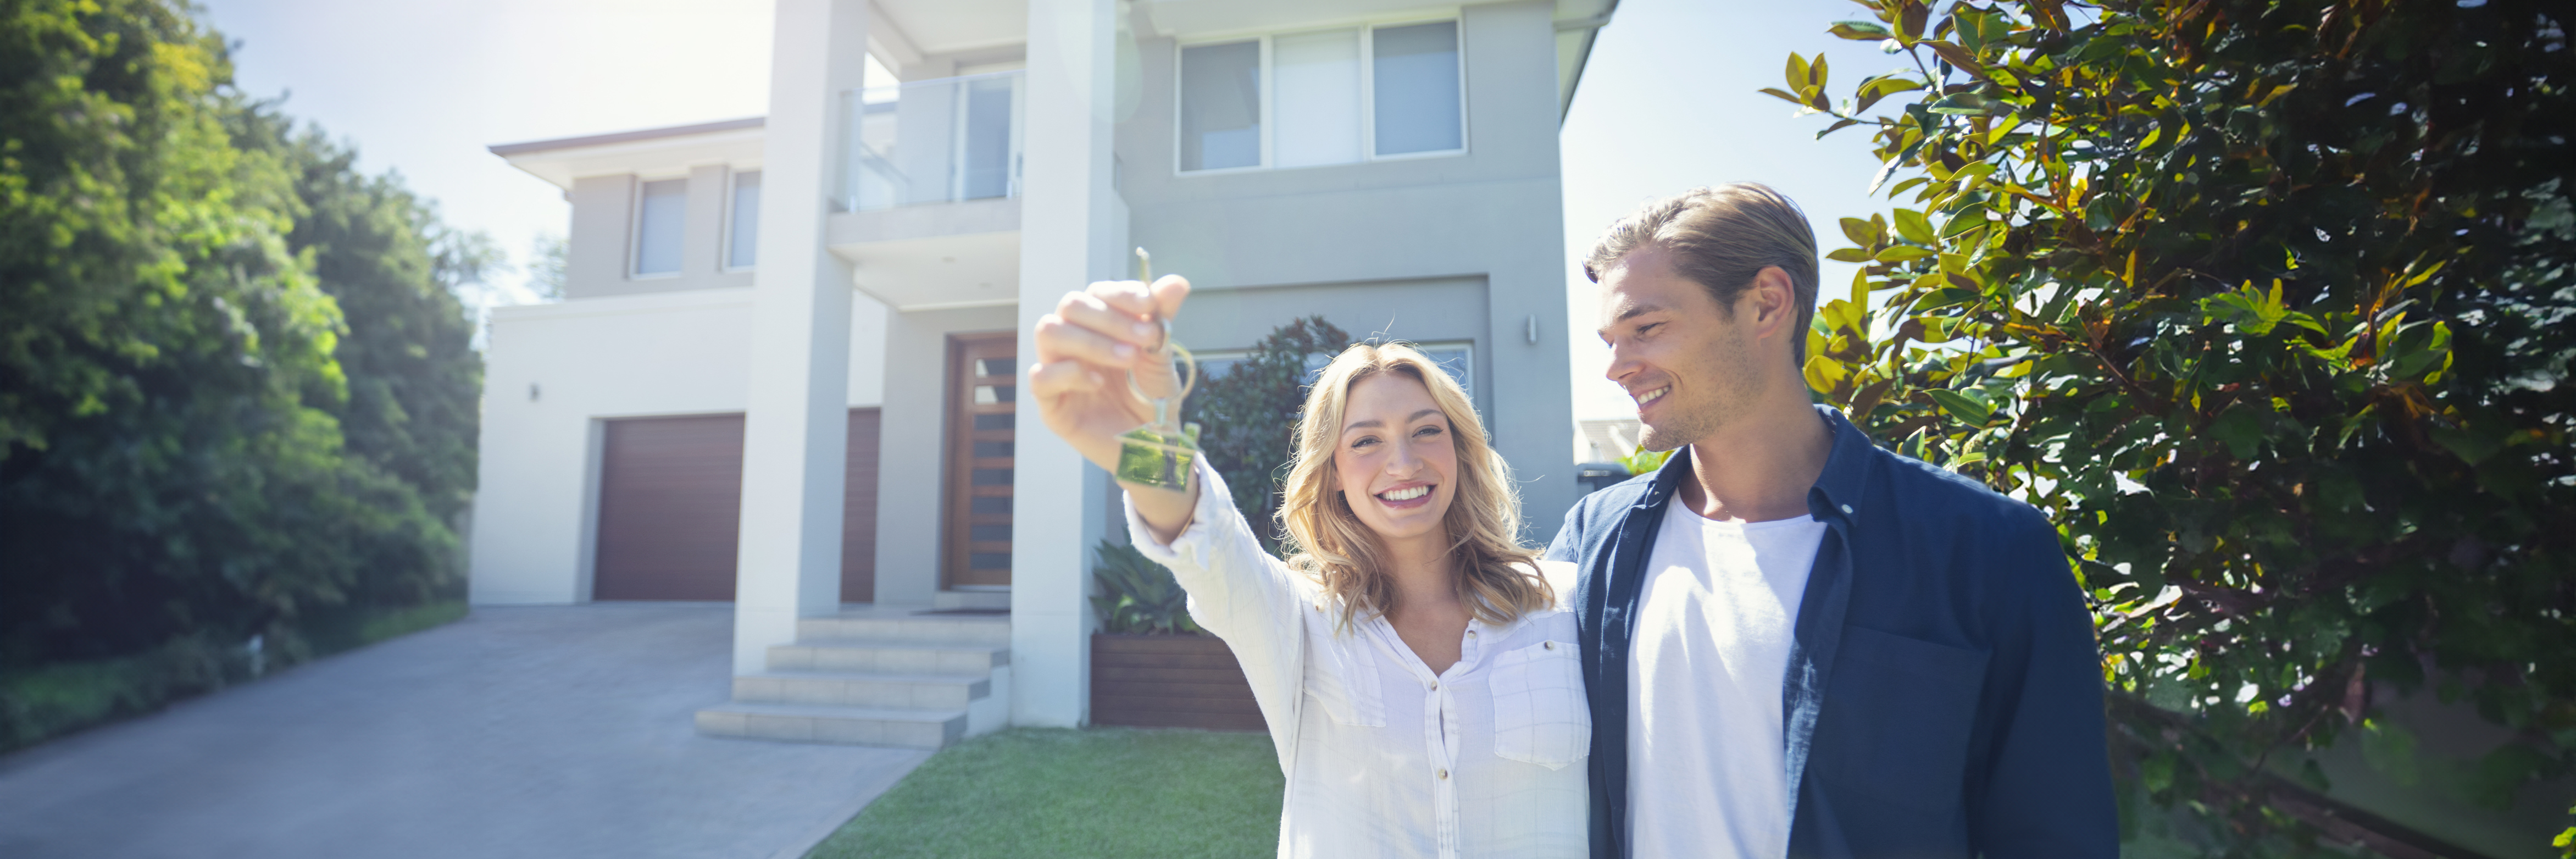 A smiling couple holding a house key in the foreground, with a modern two-story home behind them, symbolizing new home ownership.